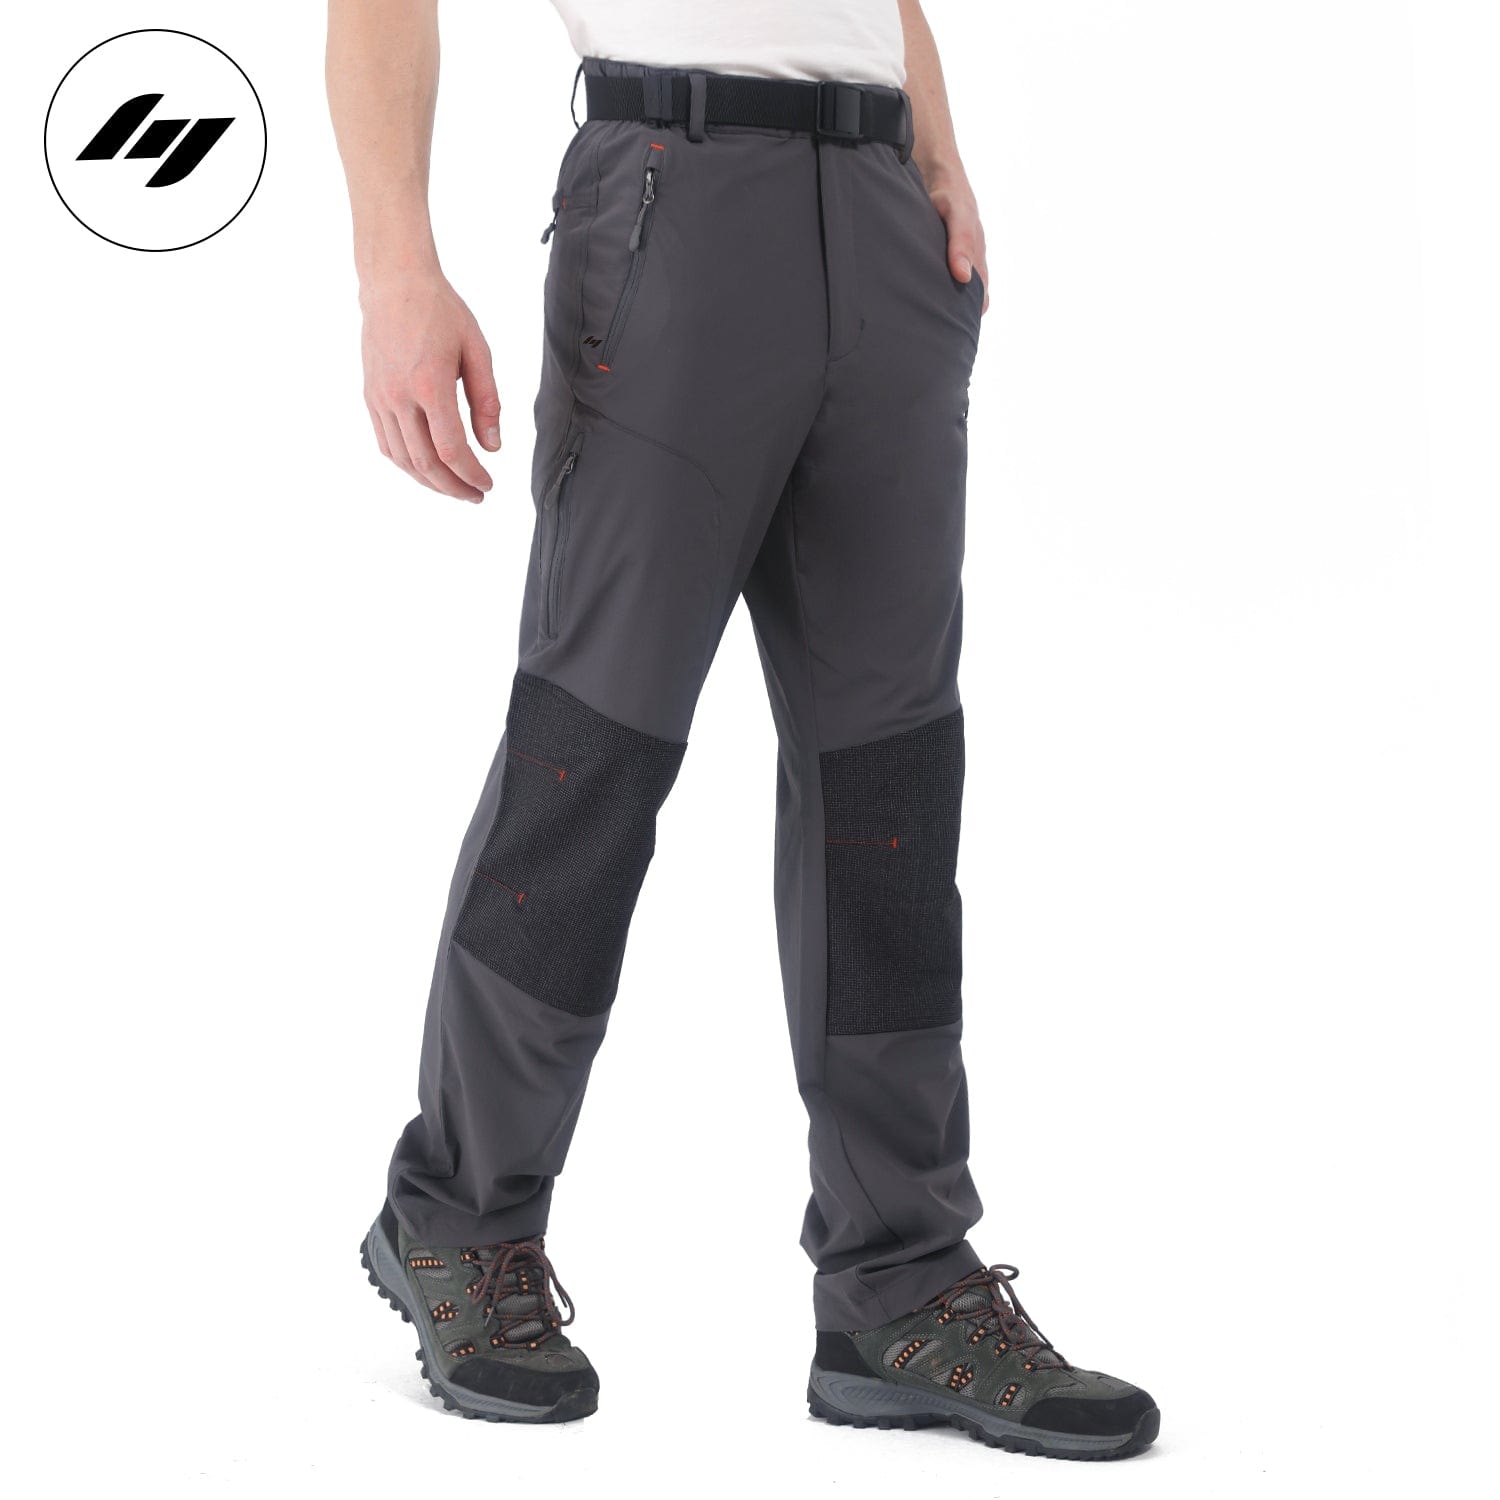 Men's Lightweight  Quick Dry Cargo Pants Pants 30 / Dimgray Mier Sports